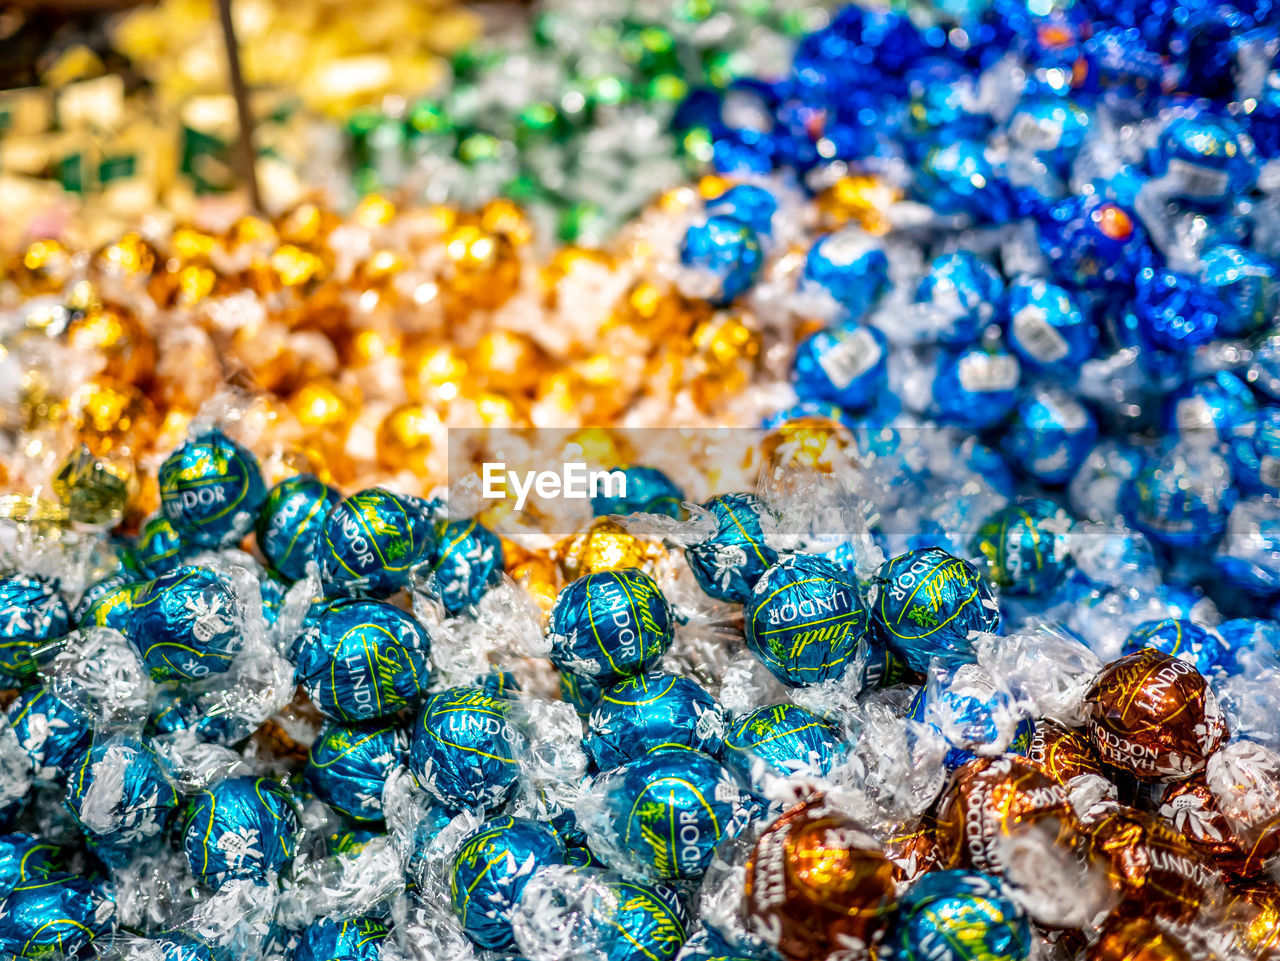 FULL FRAME SHOT OF COLORFUL CANDIES